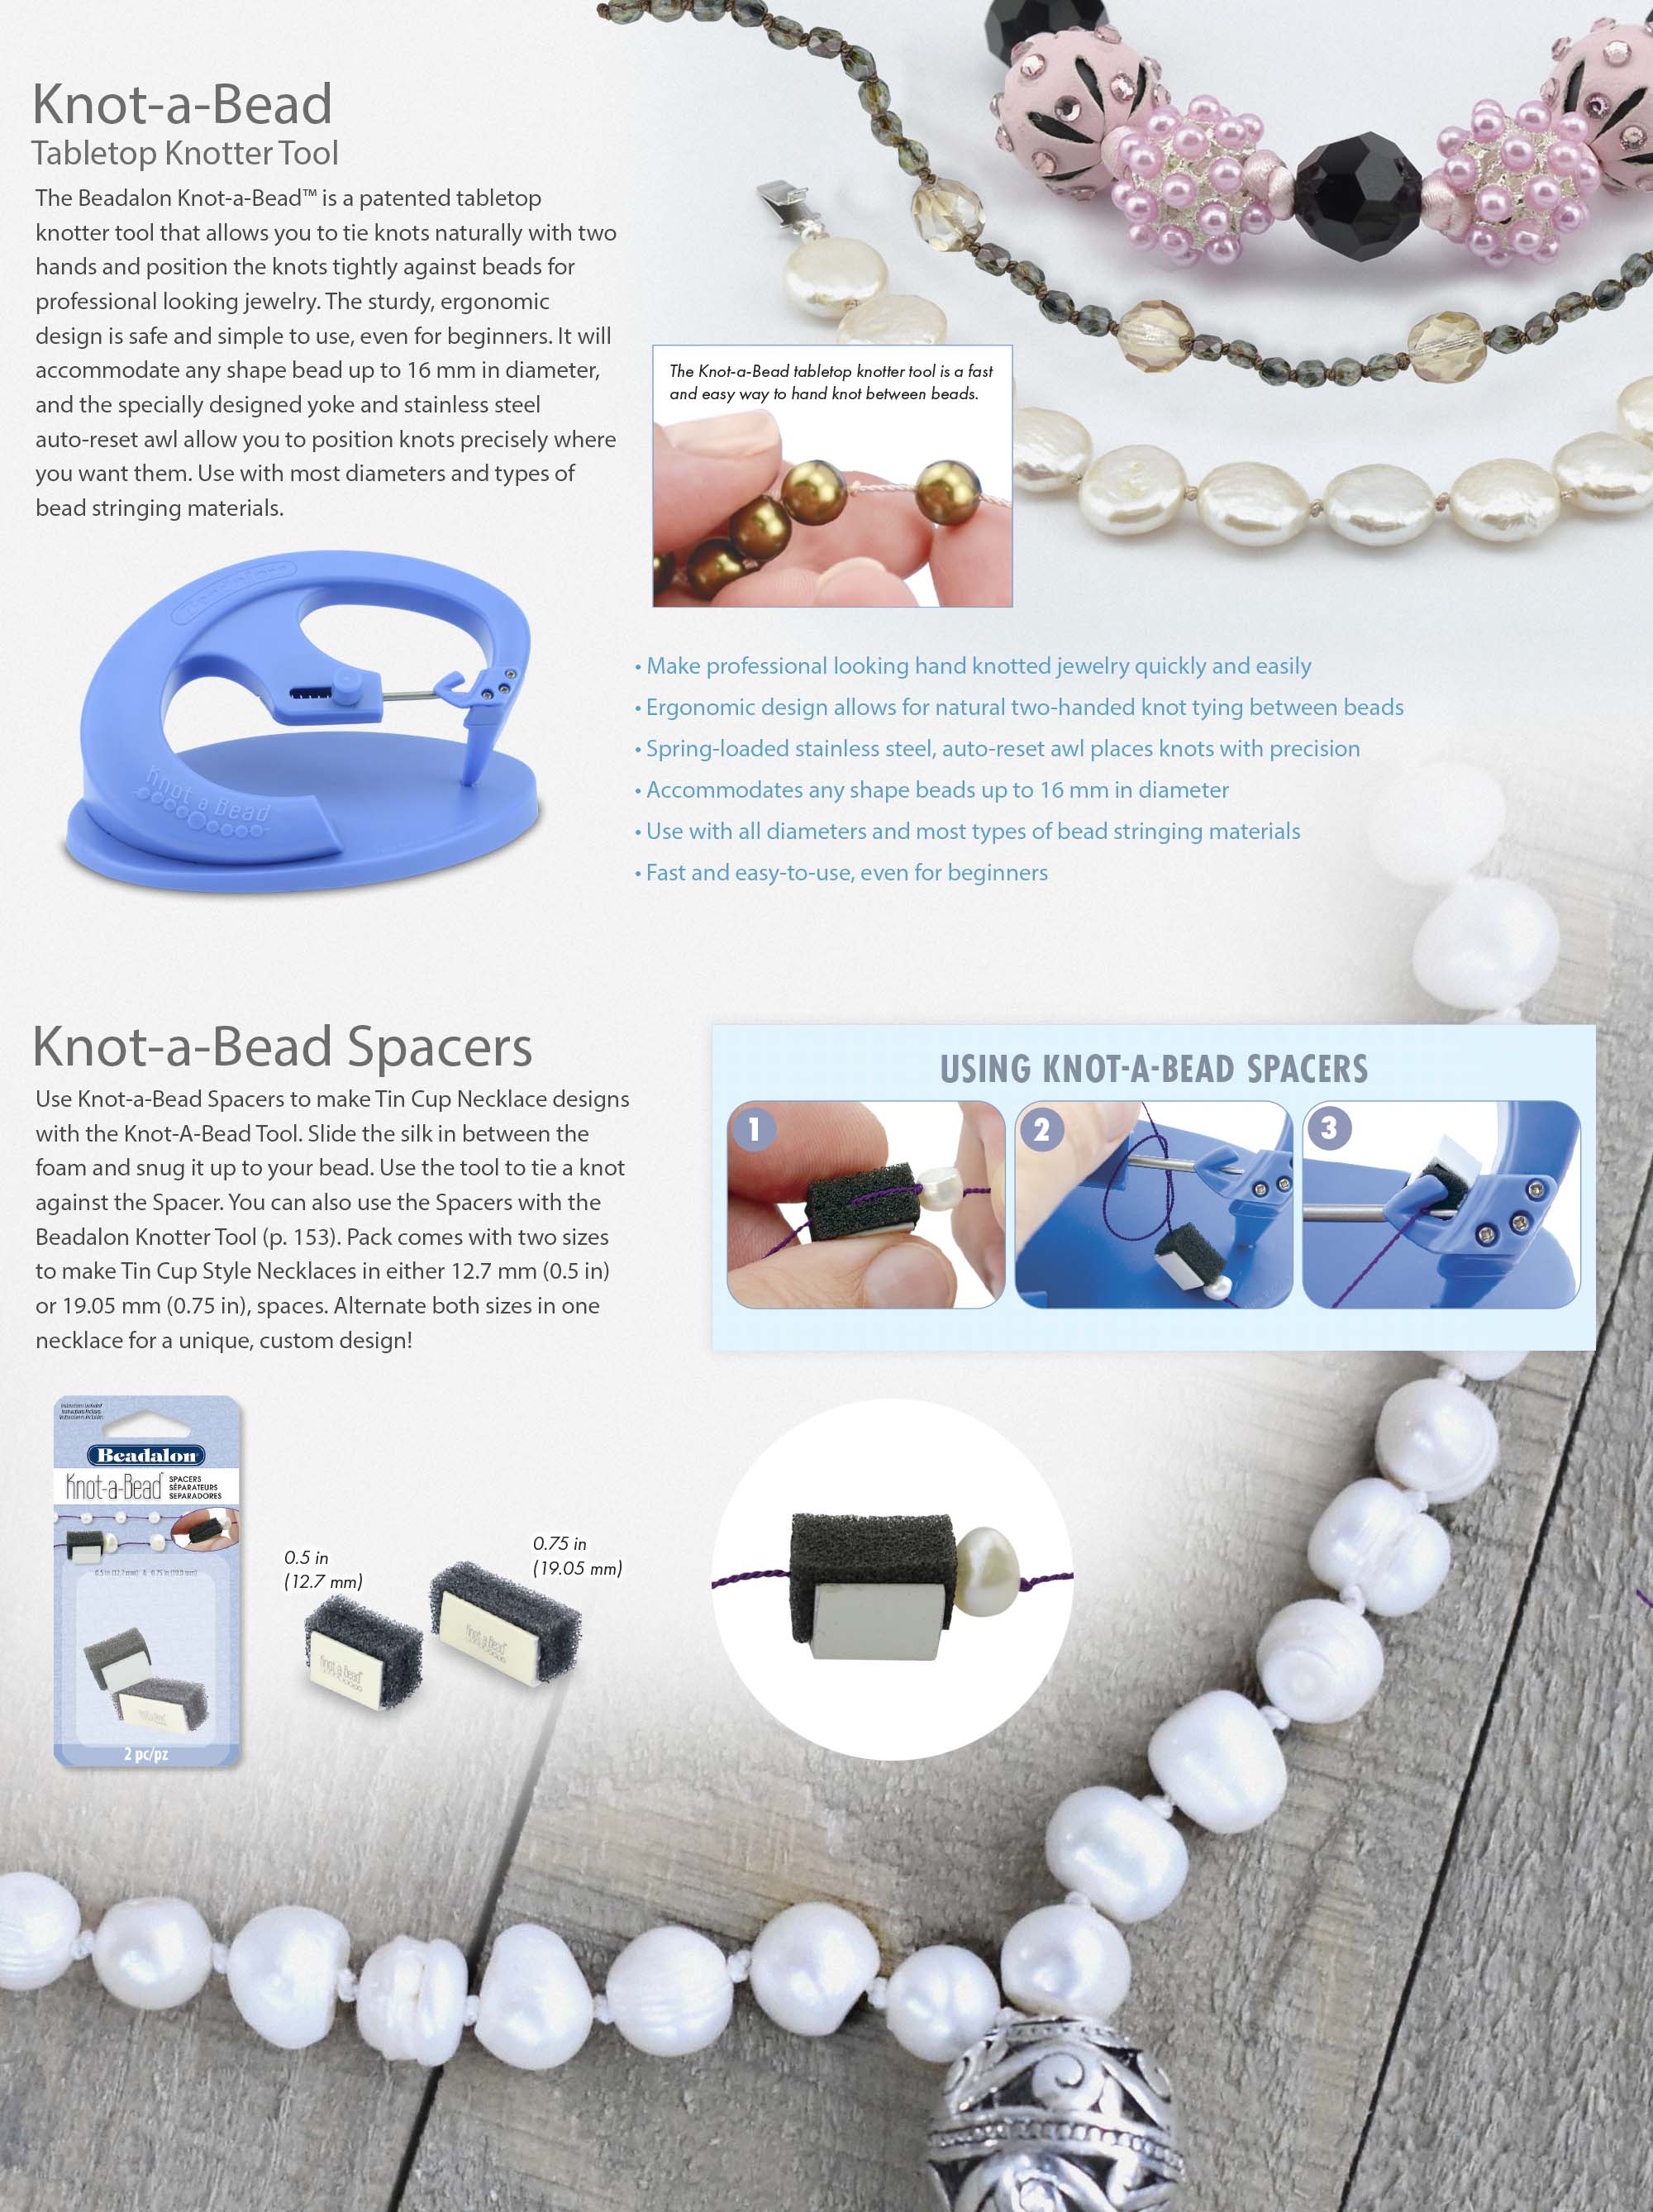 Bead Knotter Pearl Knotting tool for professional tight conistent